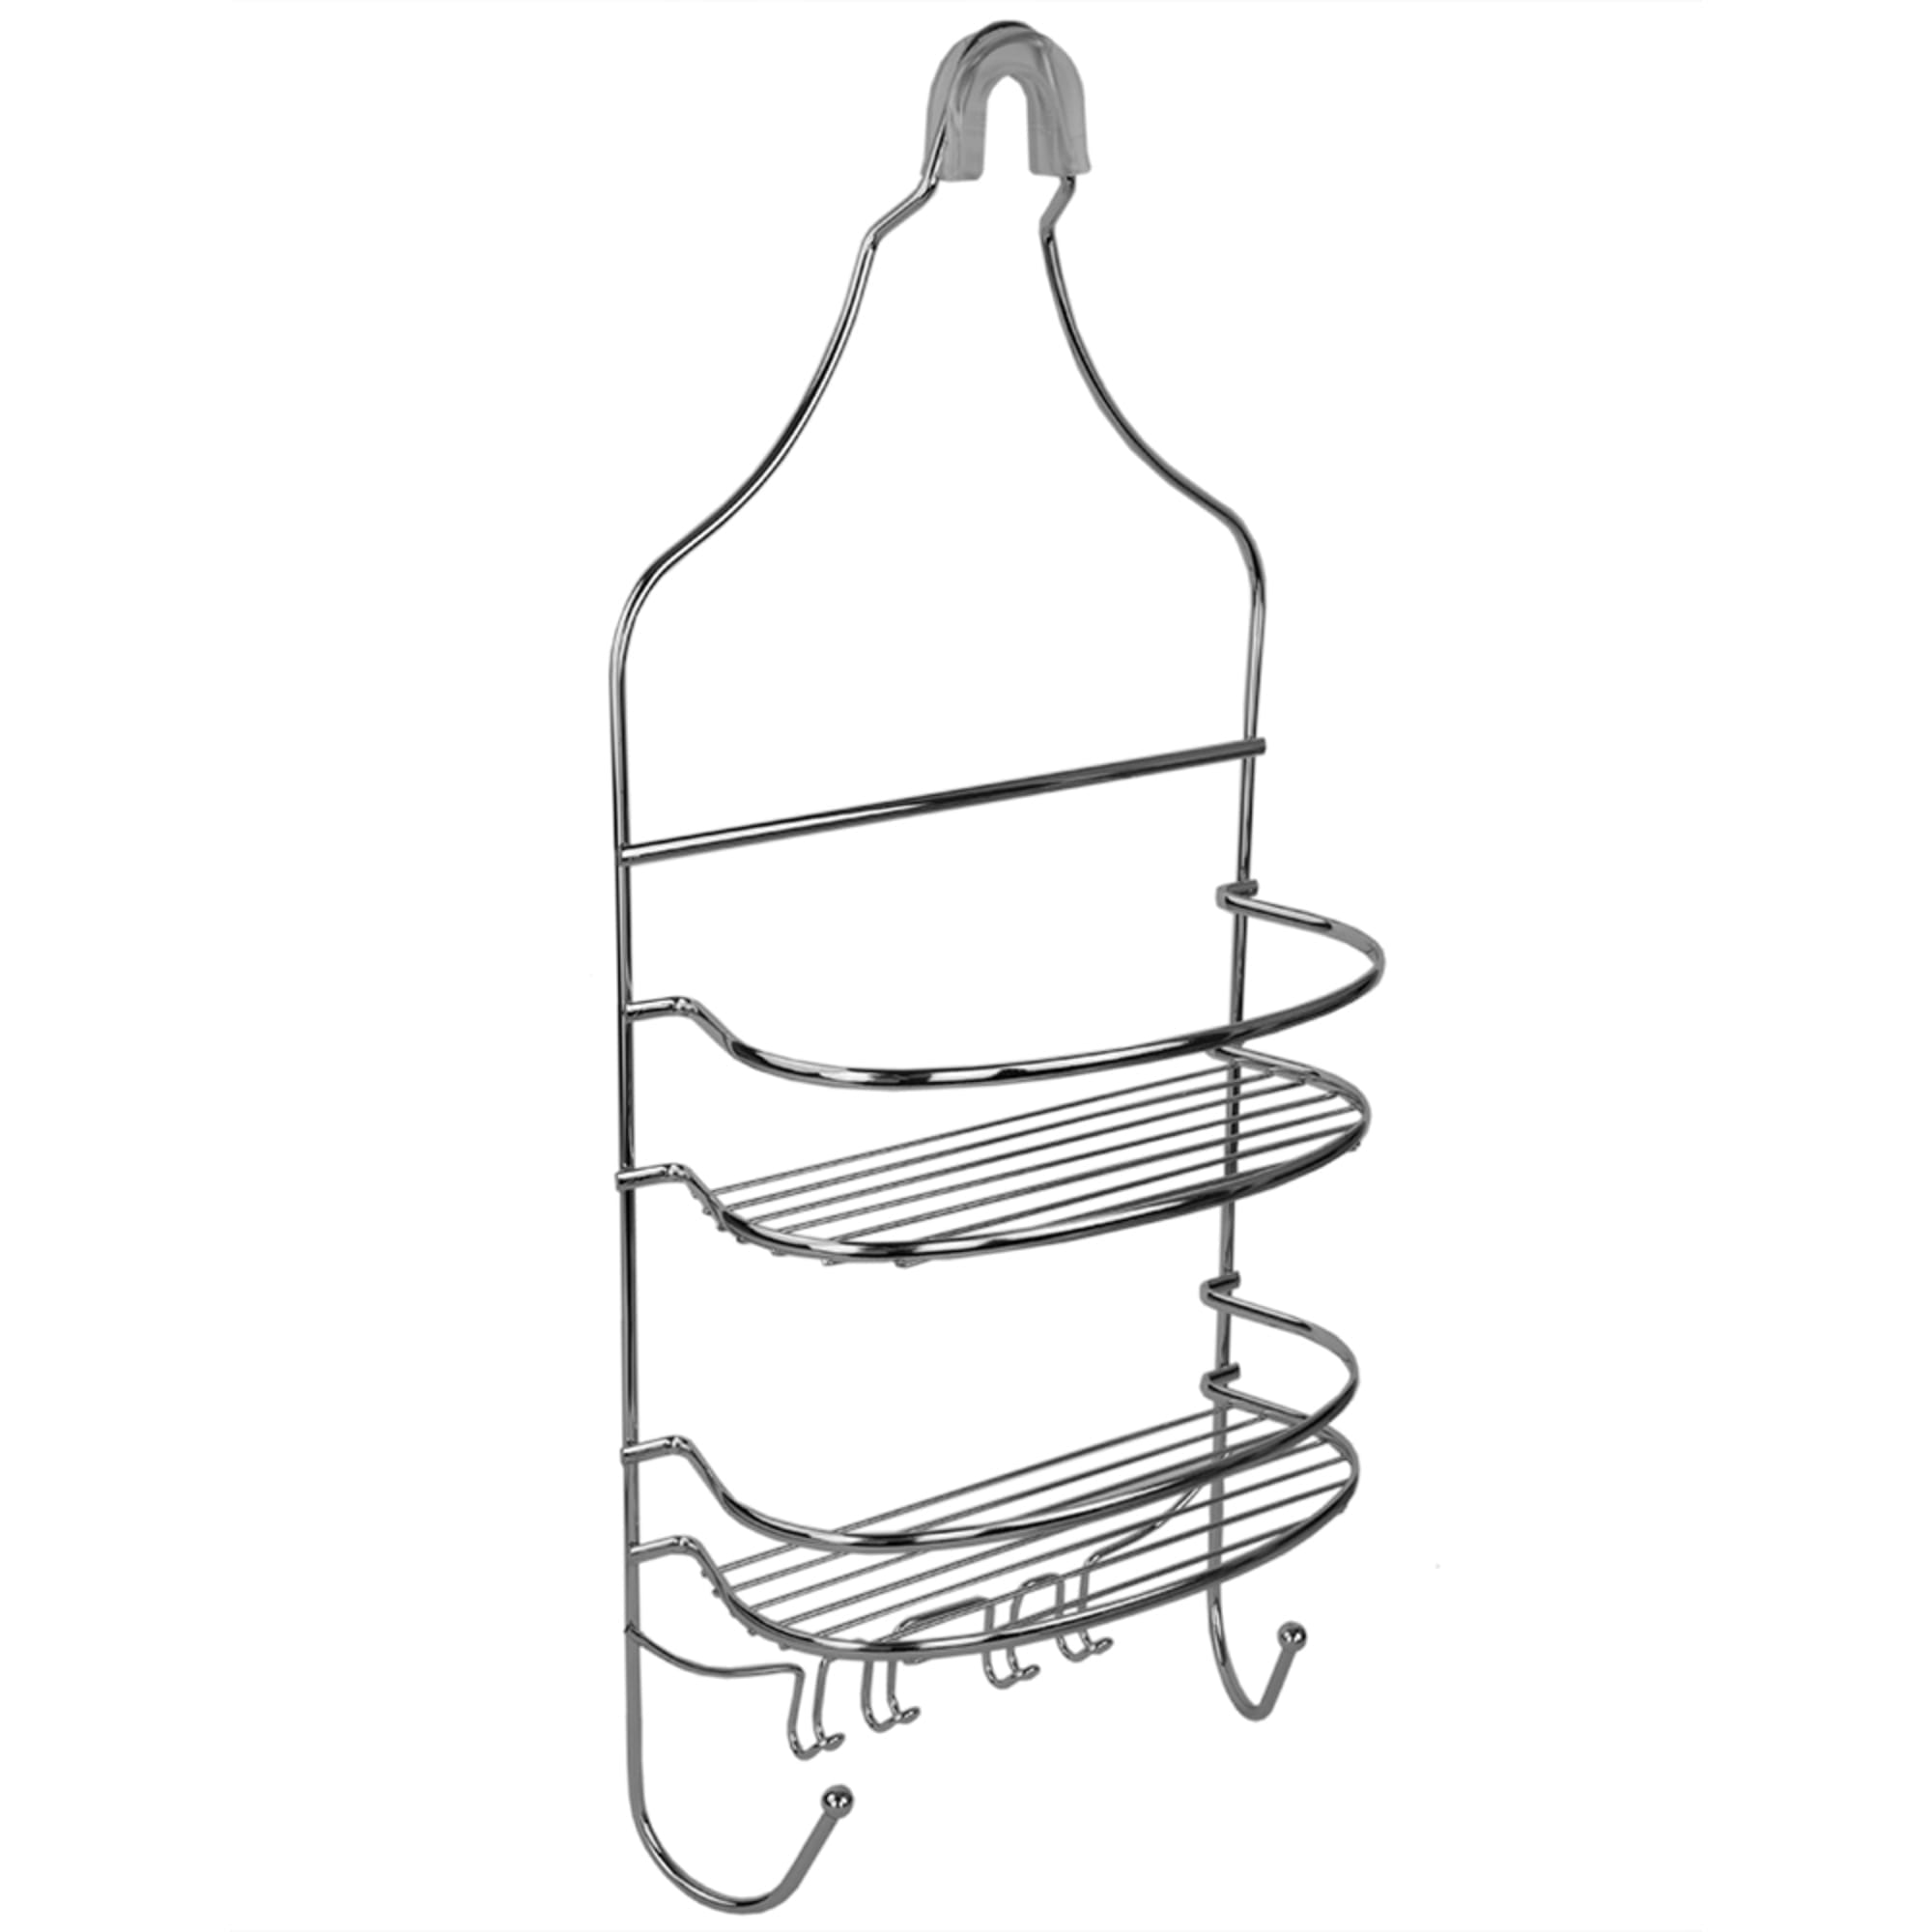 Home Basics Chrome Plated Steel Flat Wire Shower Caddy $6.00 EACH, CASE PACK OF 12